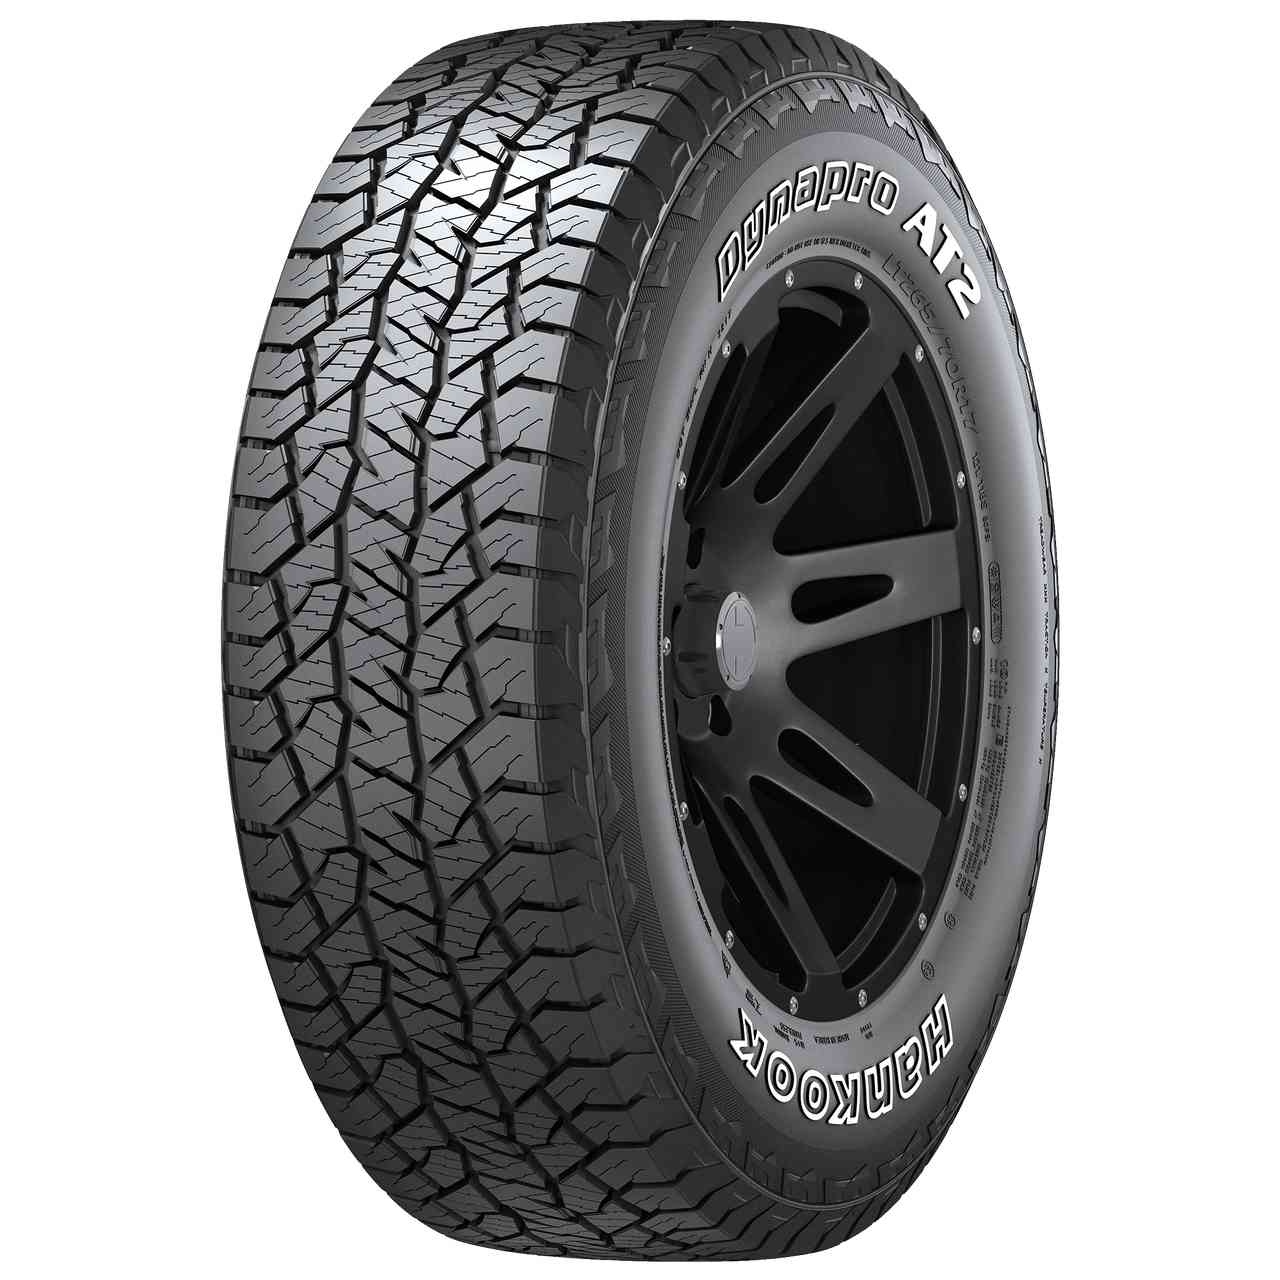 HANKOOK DYNAPRO AT2 (RF11) 235/85R16 120S BSW